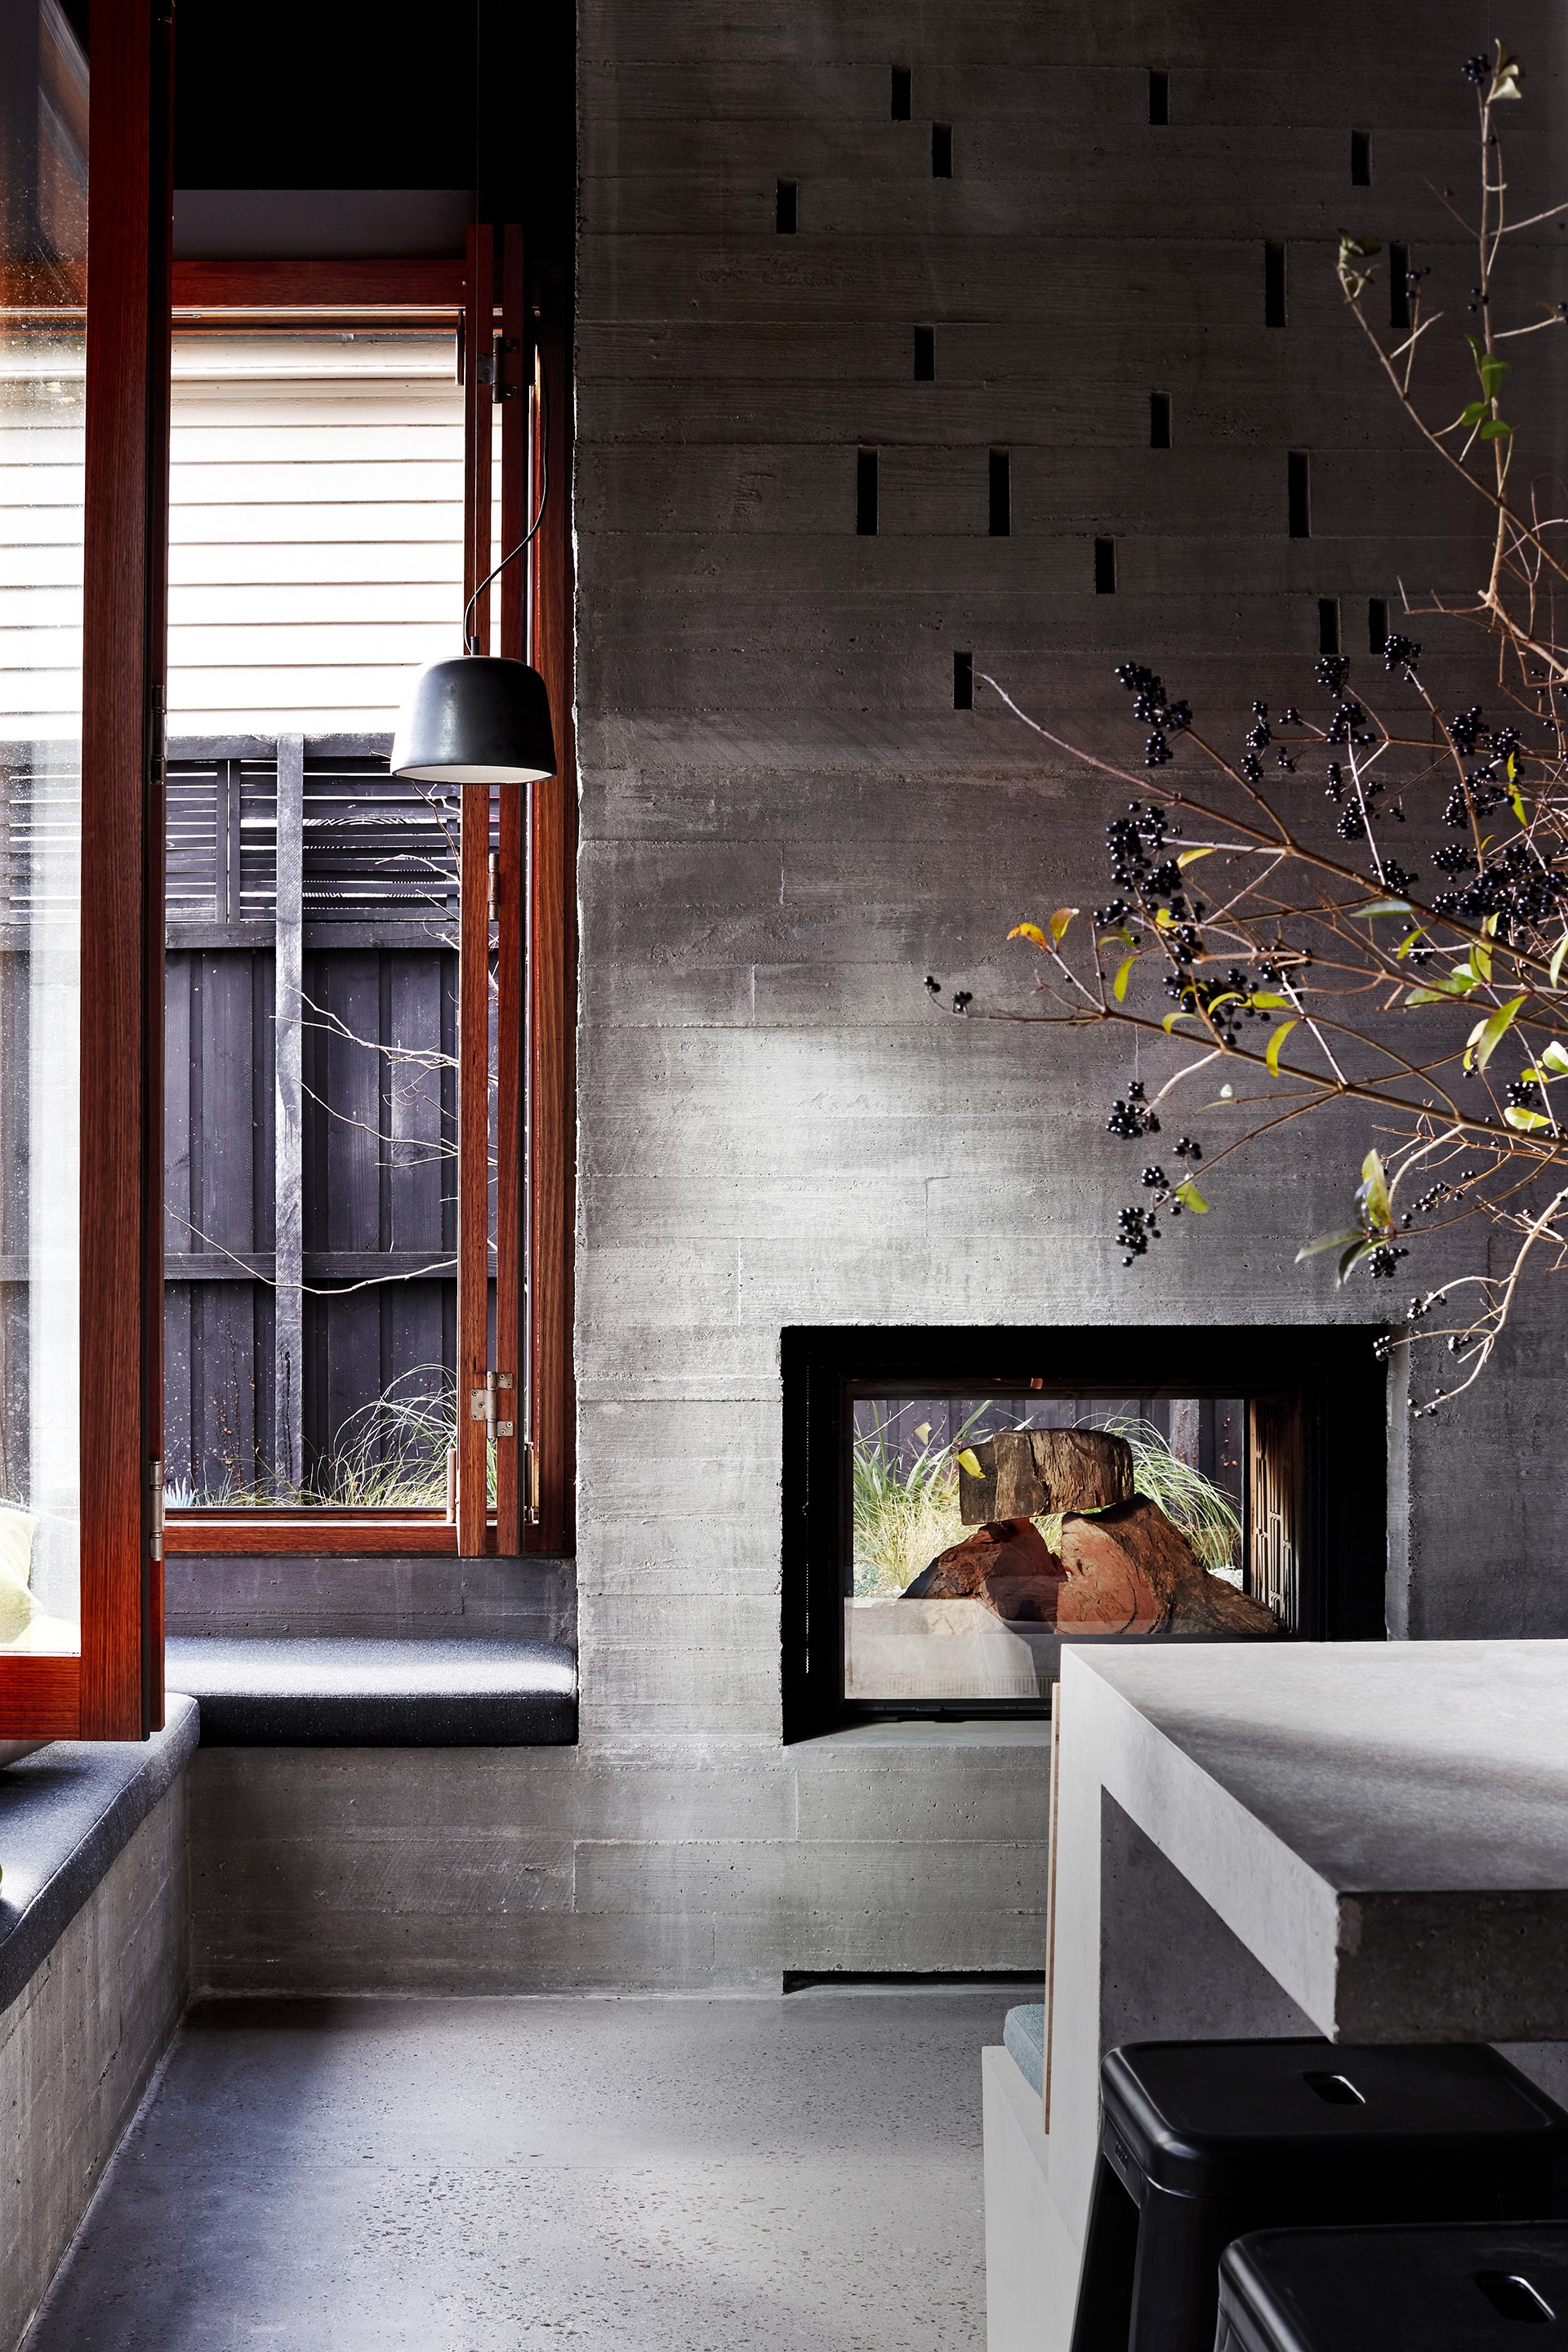 This [fashionable fireplace](https://www.homestolove.com.au/fashionable-fireplaces-for-winter-1605|target="_blank") is the focal point of the kitchen in [this suburban home in Melbourne's St Kilda](http://www.homestolove.com.au/architects-serve-up-cafe-aesthetic-for-suburban-home-3089|target="_blank") with a cafe aesthetic.